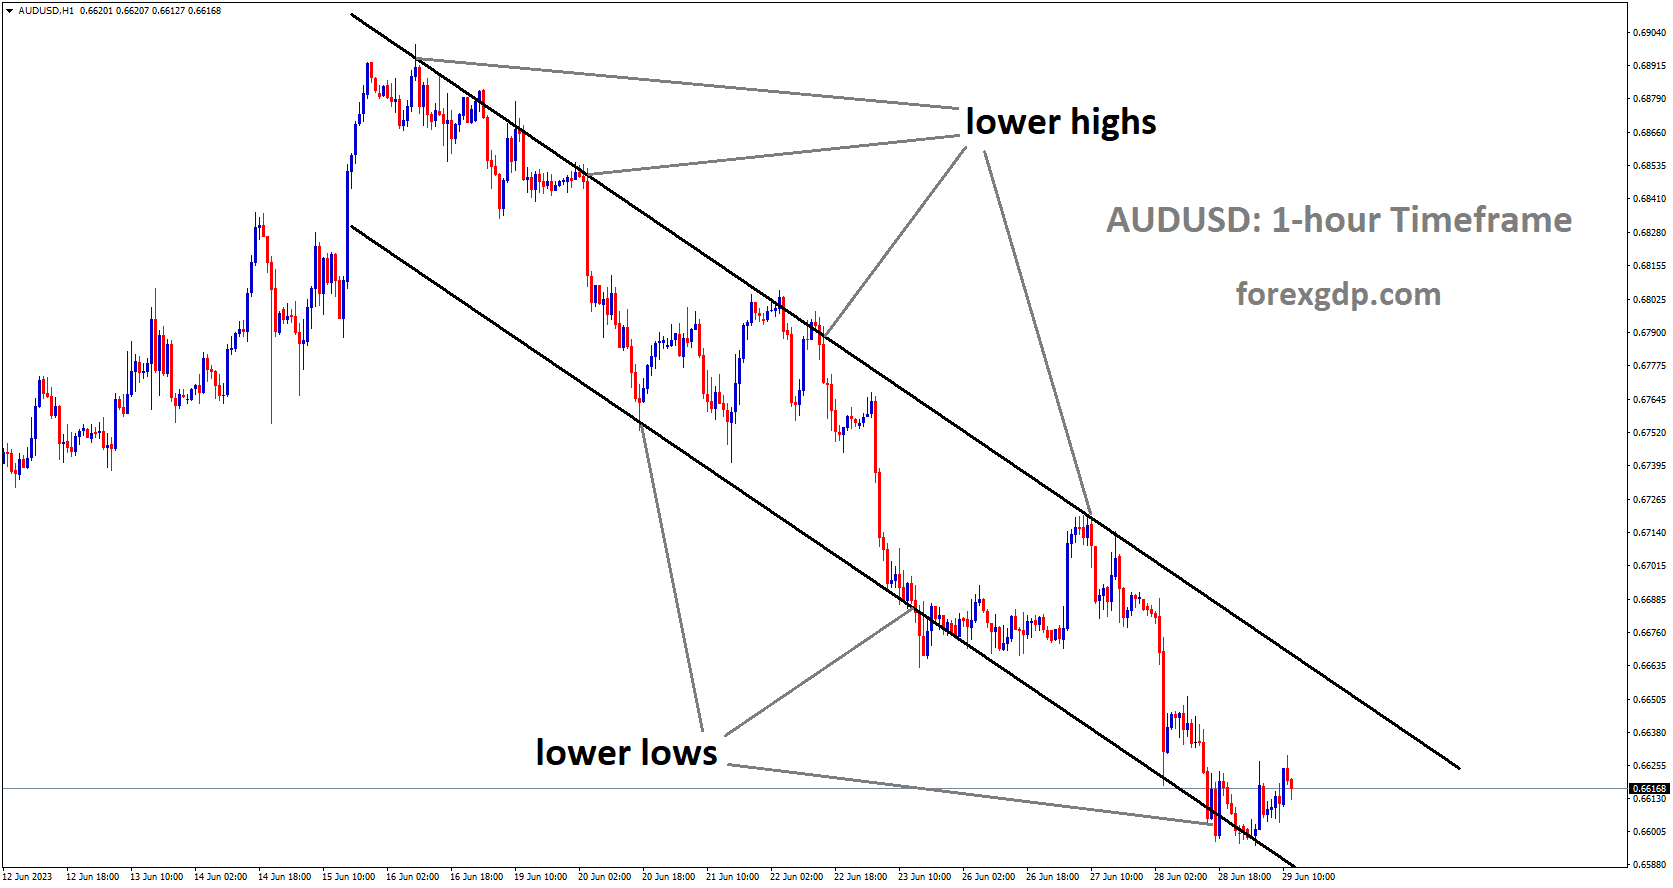 AUDUSD is moving in Descending channel and the market has rebounded from the lower low area of the channel.